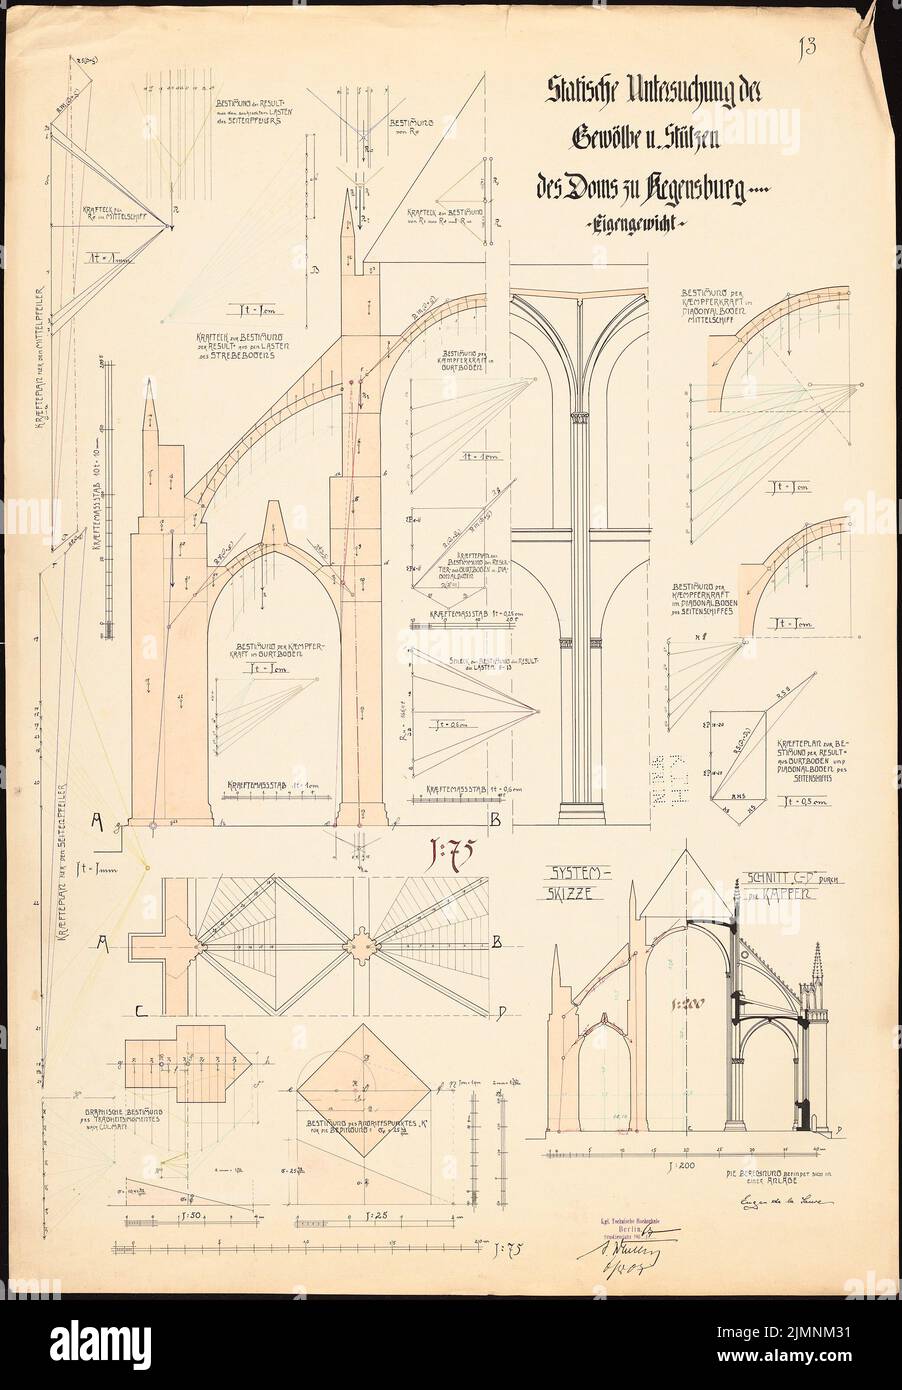 Sauce Eugen de la, statistical examination of the vaults and supports of the cathedral in Regensburg (06.08.1907): cuts, detailed drawings, geometric constructions. Ink, ink colored watercolor on the box, 99.8 x 69.3 cm (including scan edges) Sauce Eugen de la : Statistische Untersuchung der Gewölbe und Stützen des Doms, Regensburg Stock Photo